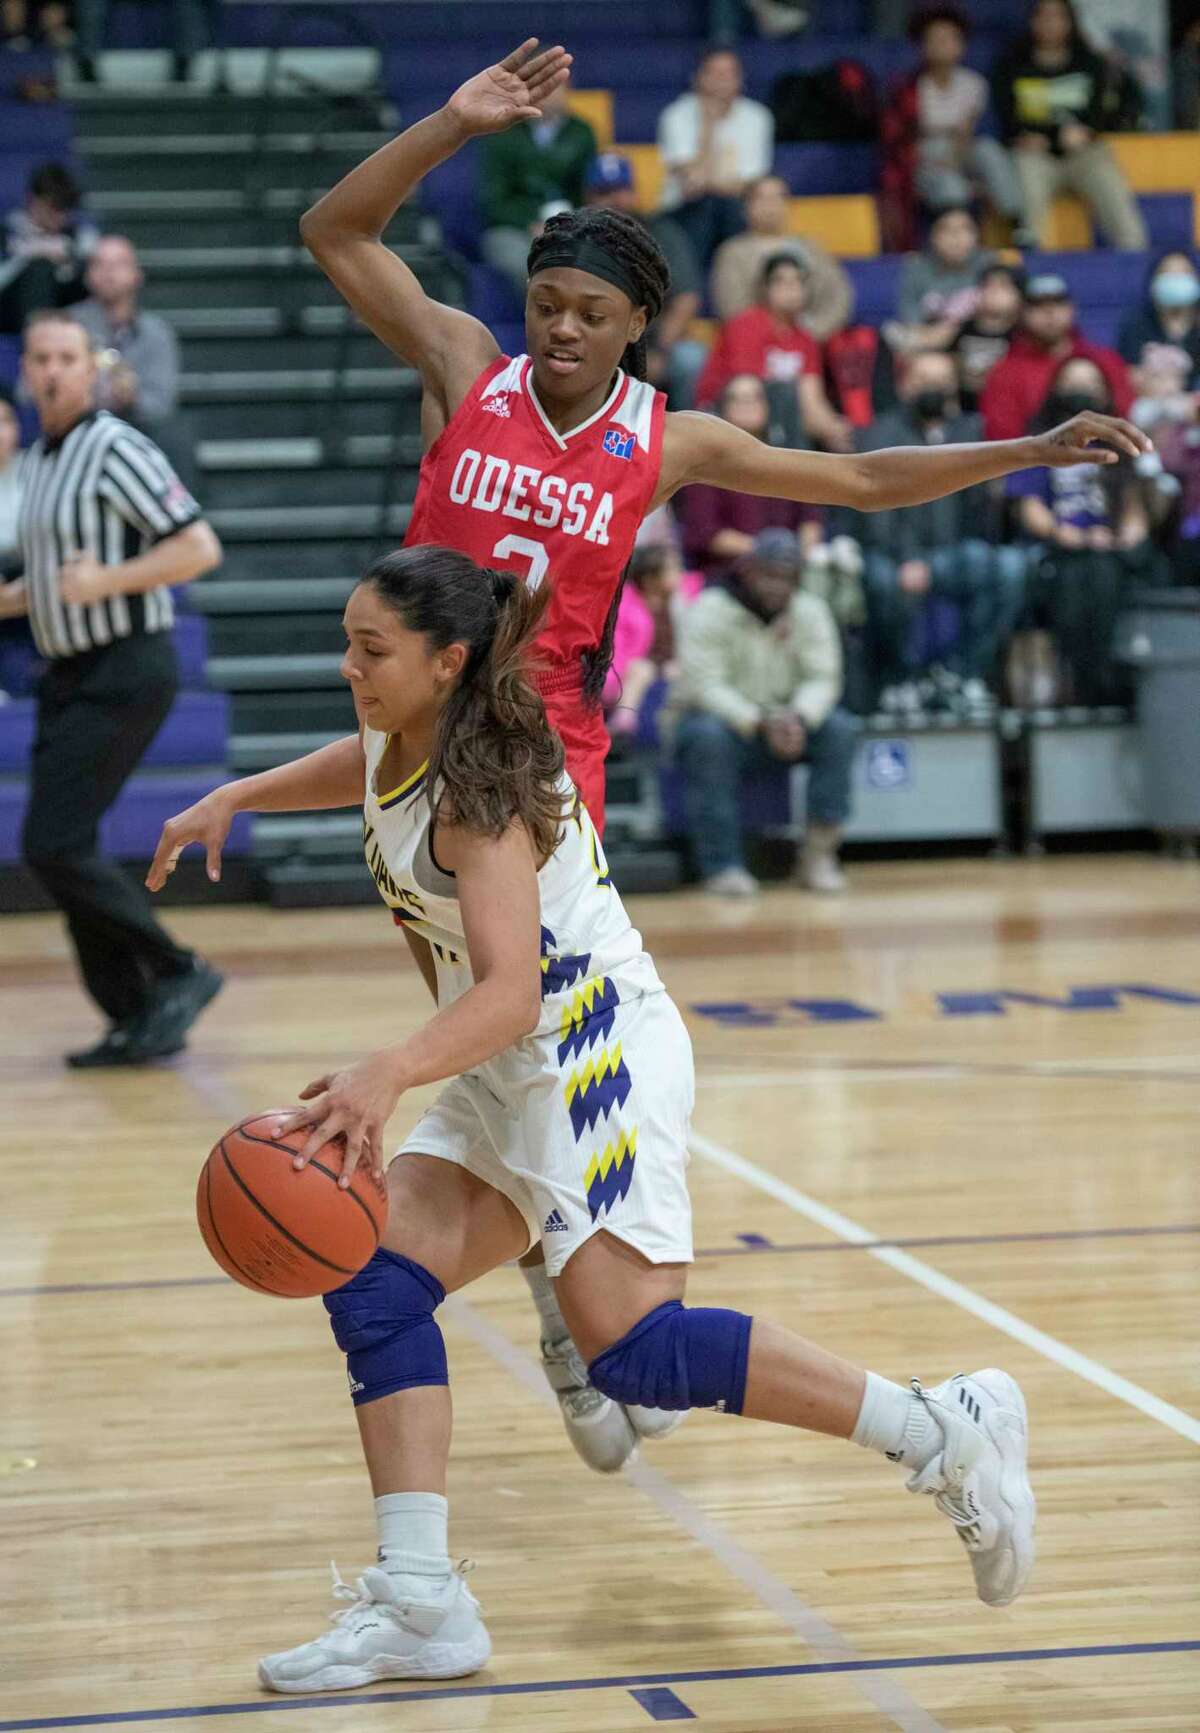 Midland High's Noemi Arciga drives to the basket as Odessa High's Donajah Watkins leaps too early to block 01/18/2022 at the Midland High gym. Tim Fischer/Reporter-Telegram